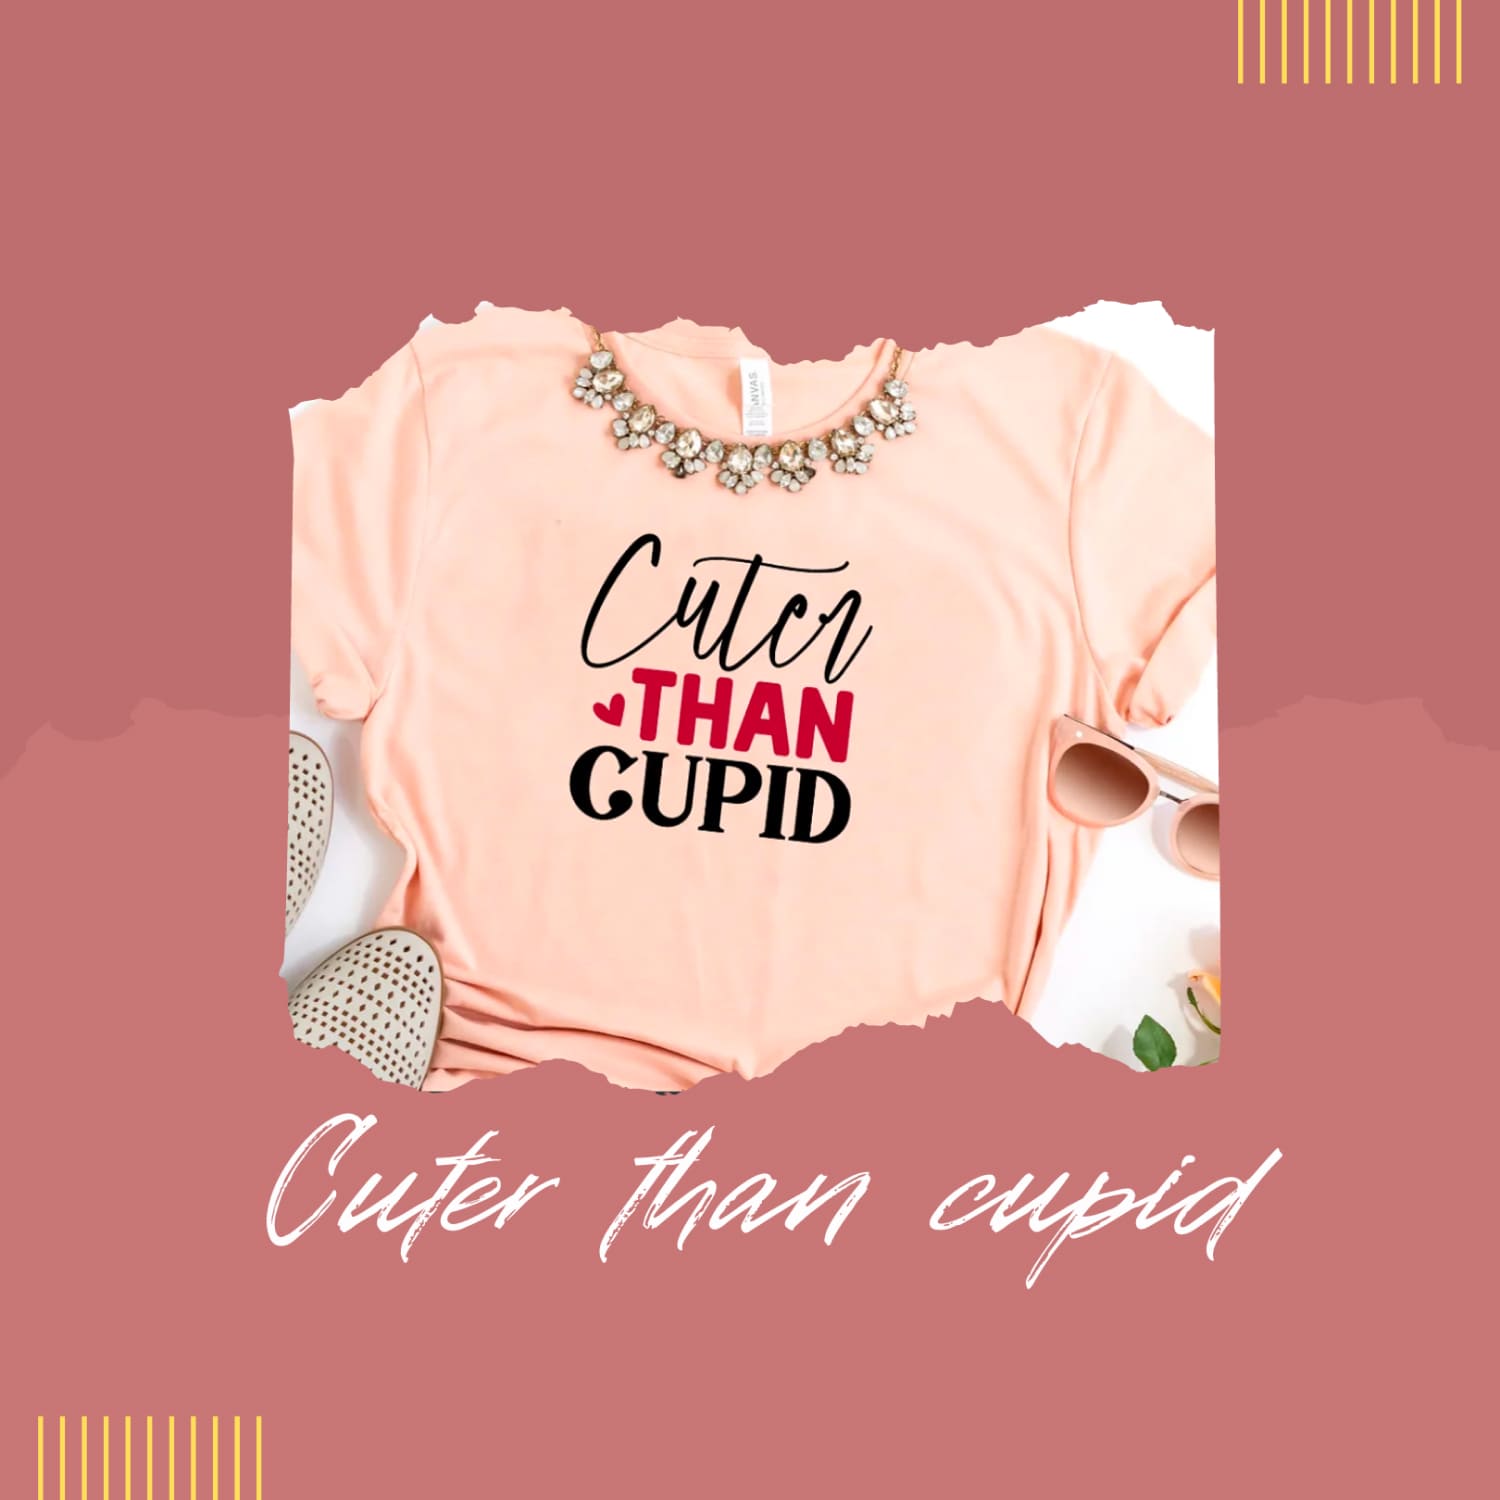 Cuter than cupid - main image preview.